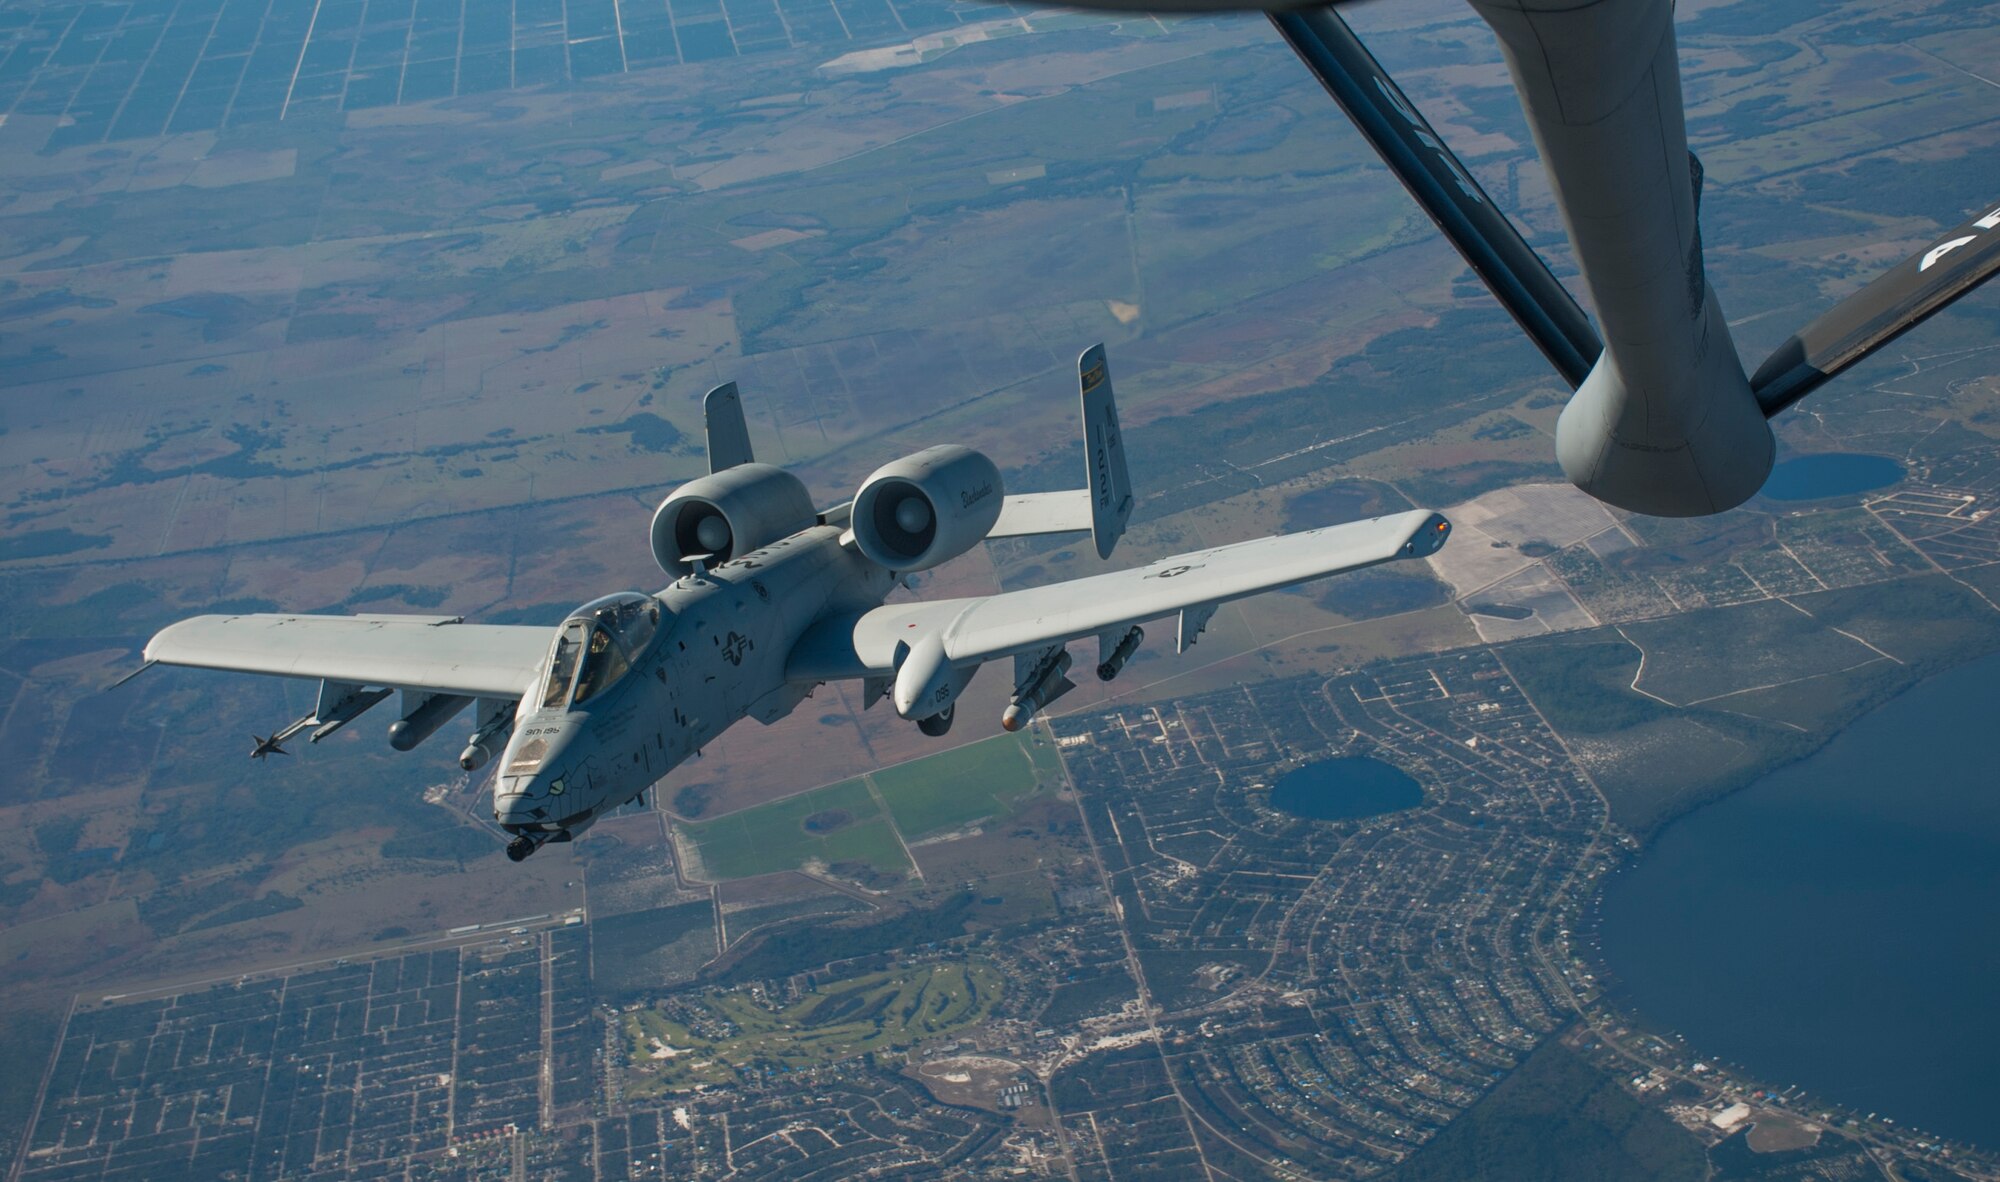 An A-10 Thunderbolt II aircraft with the 122nd Fighter Wing (FW), Fort Wayne Air National Guard Station, Ind., banks right after receiving fuel from a KC-135 Stratotanker with the 914th Air Refueling Wing (ARW), Niagara Air Reserve Station, N.Y., over Avon Park, Fla., Jan. 30, 2018.